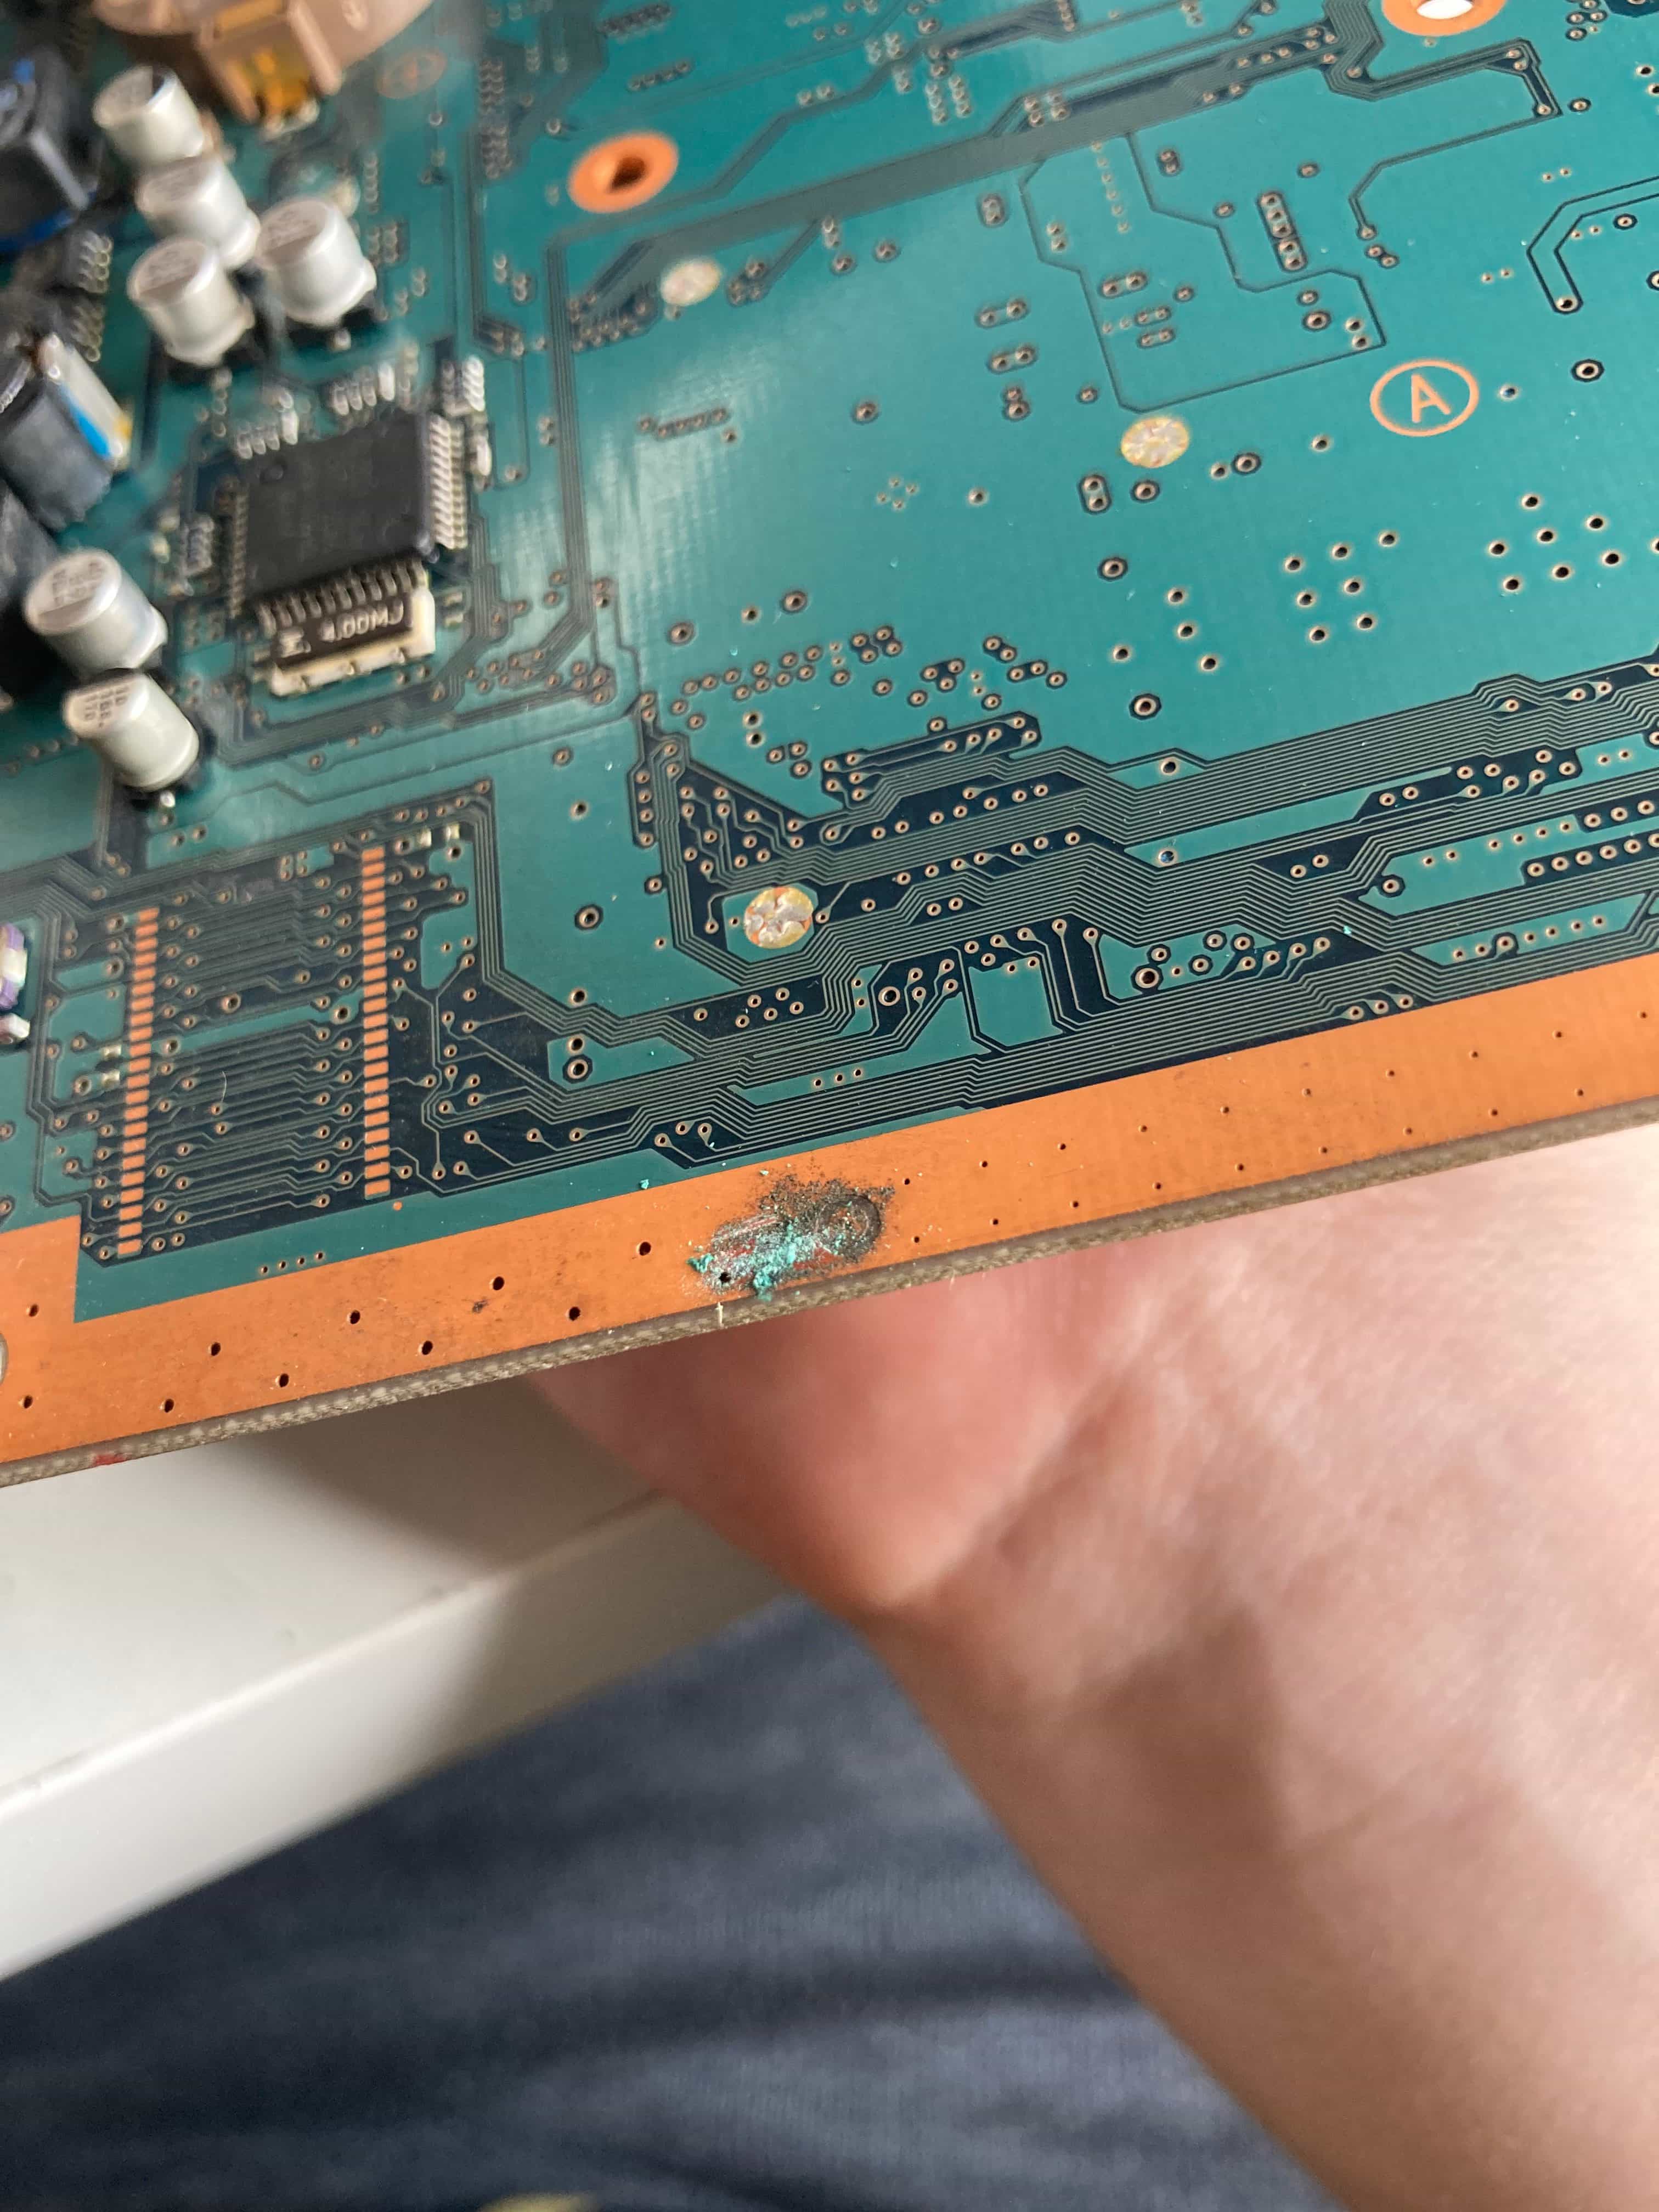 The only ugly spot on the motherboard